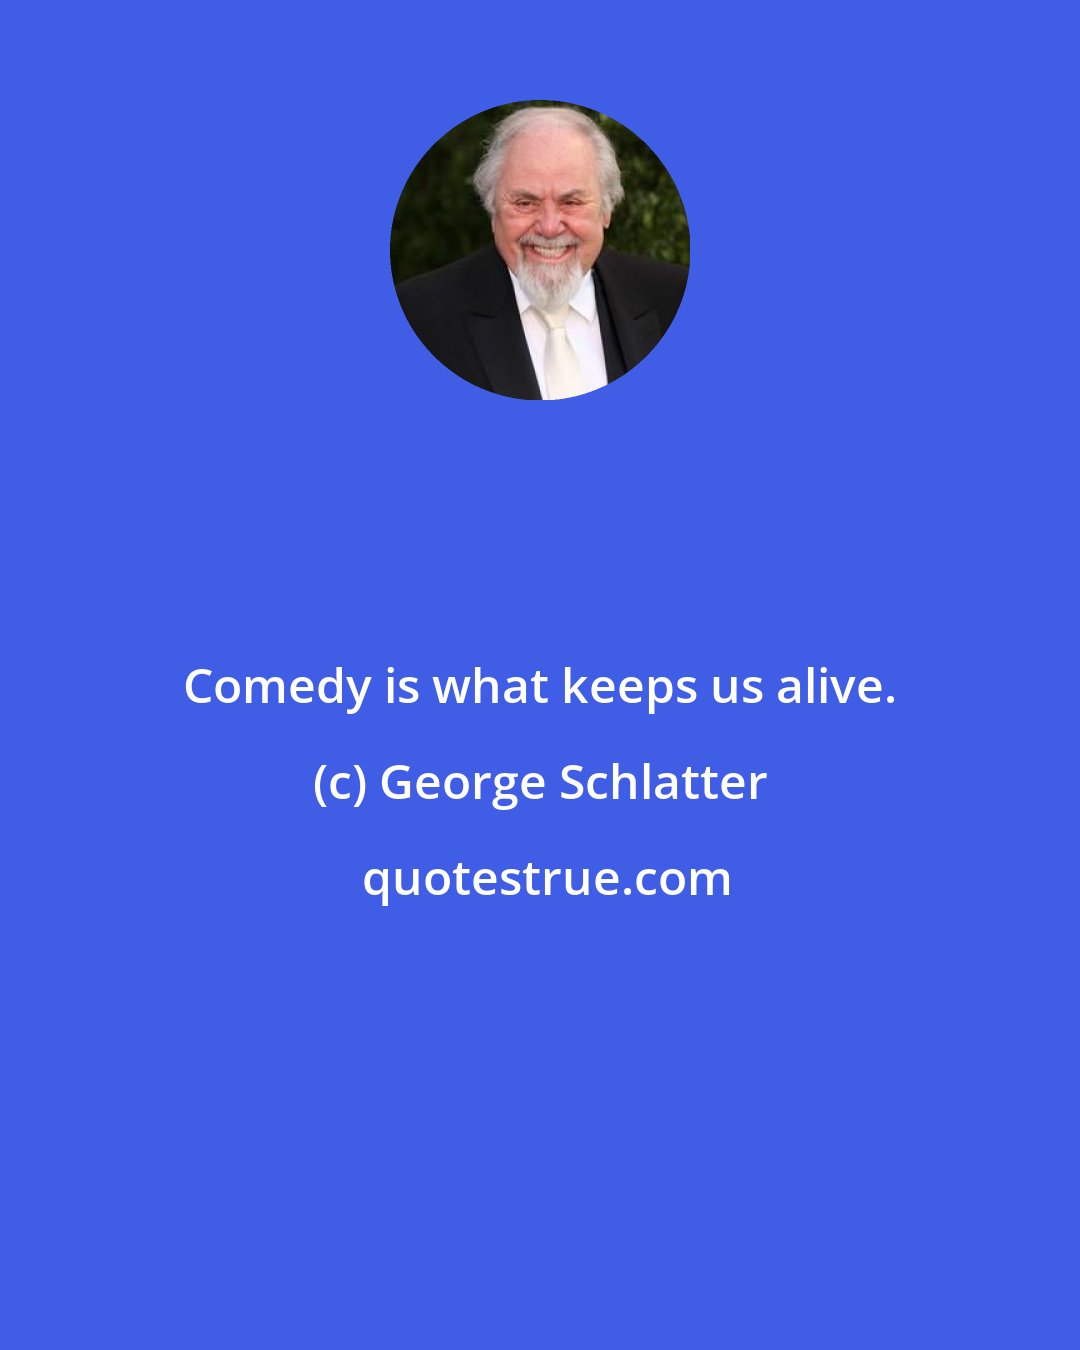 George Schlatter: Comedy is what keeps us alive.